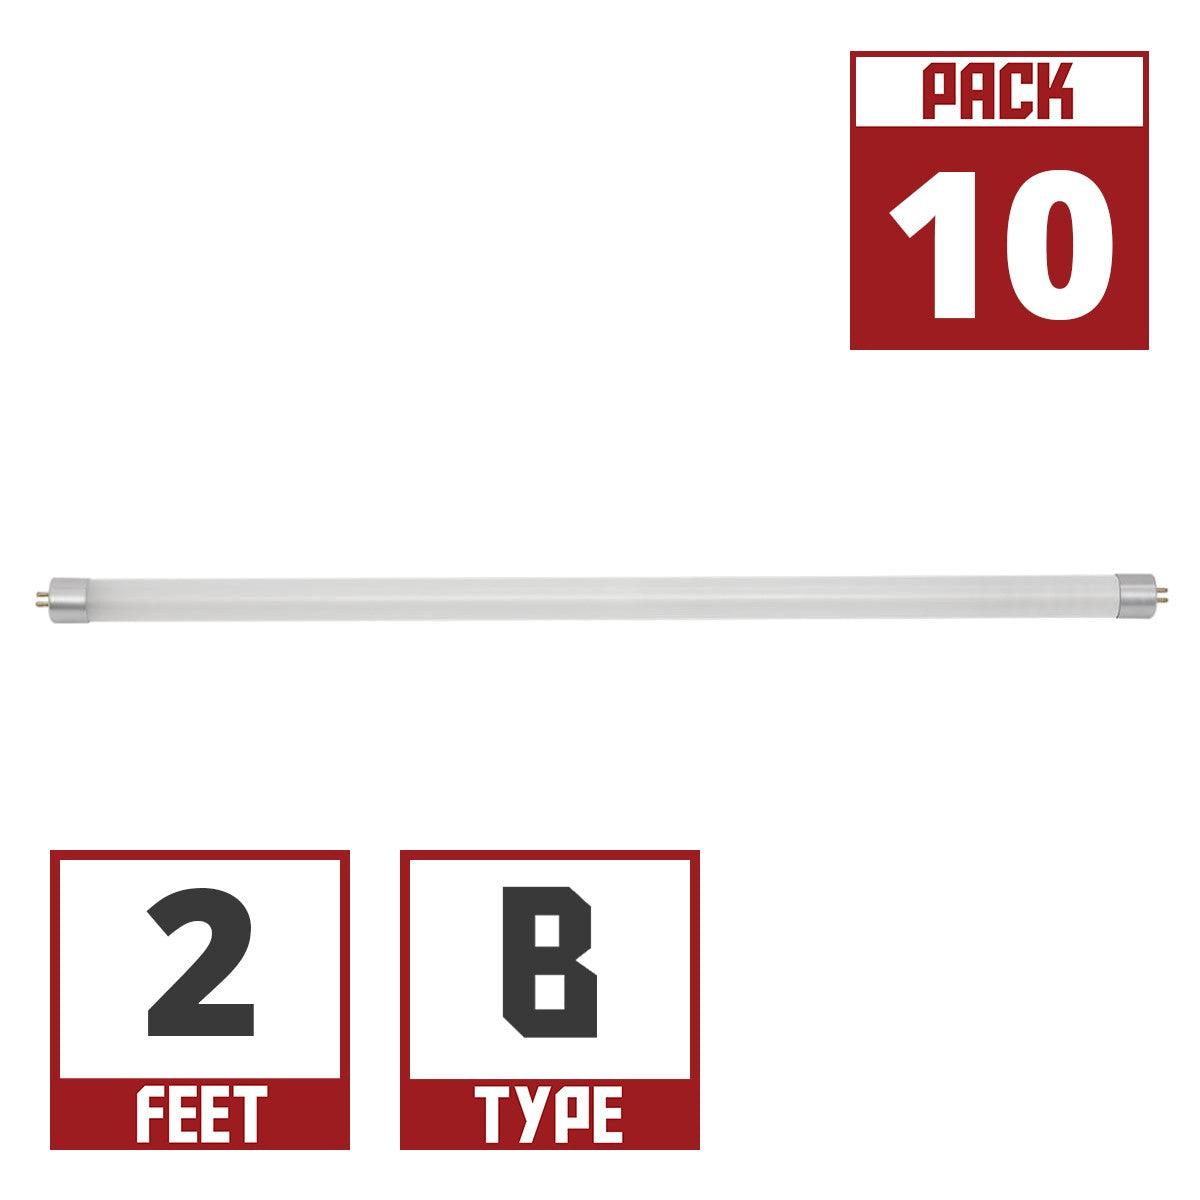 21 Inch LED mini T5 Tube, 7 Watt, 700 Lumens, 6500K, F13T5 Replacement, Ballast Bypass, Double End, G5 Base (Case Of 10) - Bees Lighting